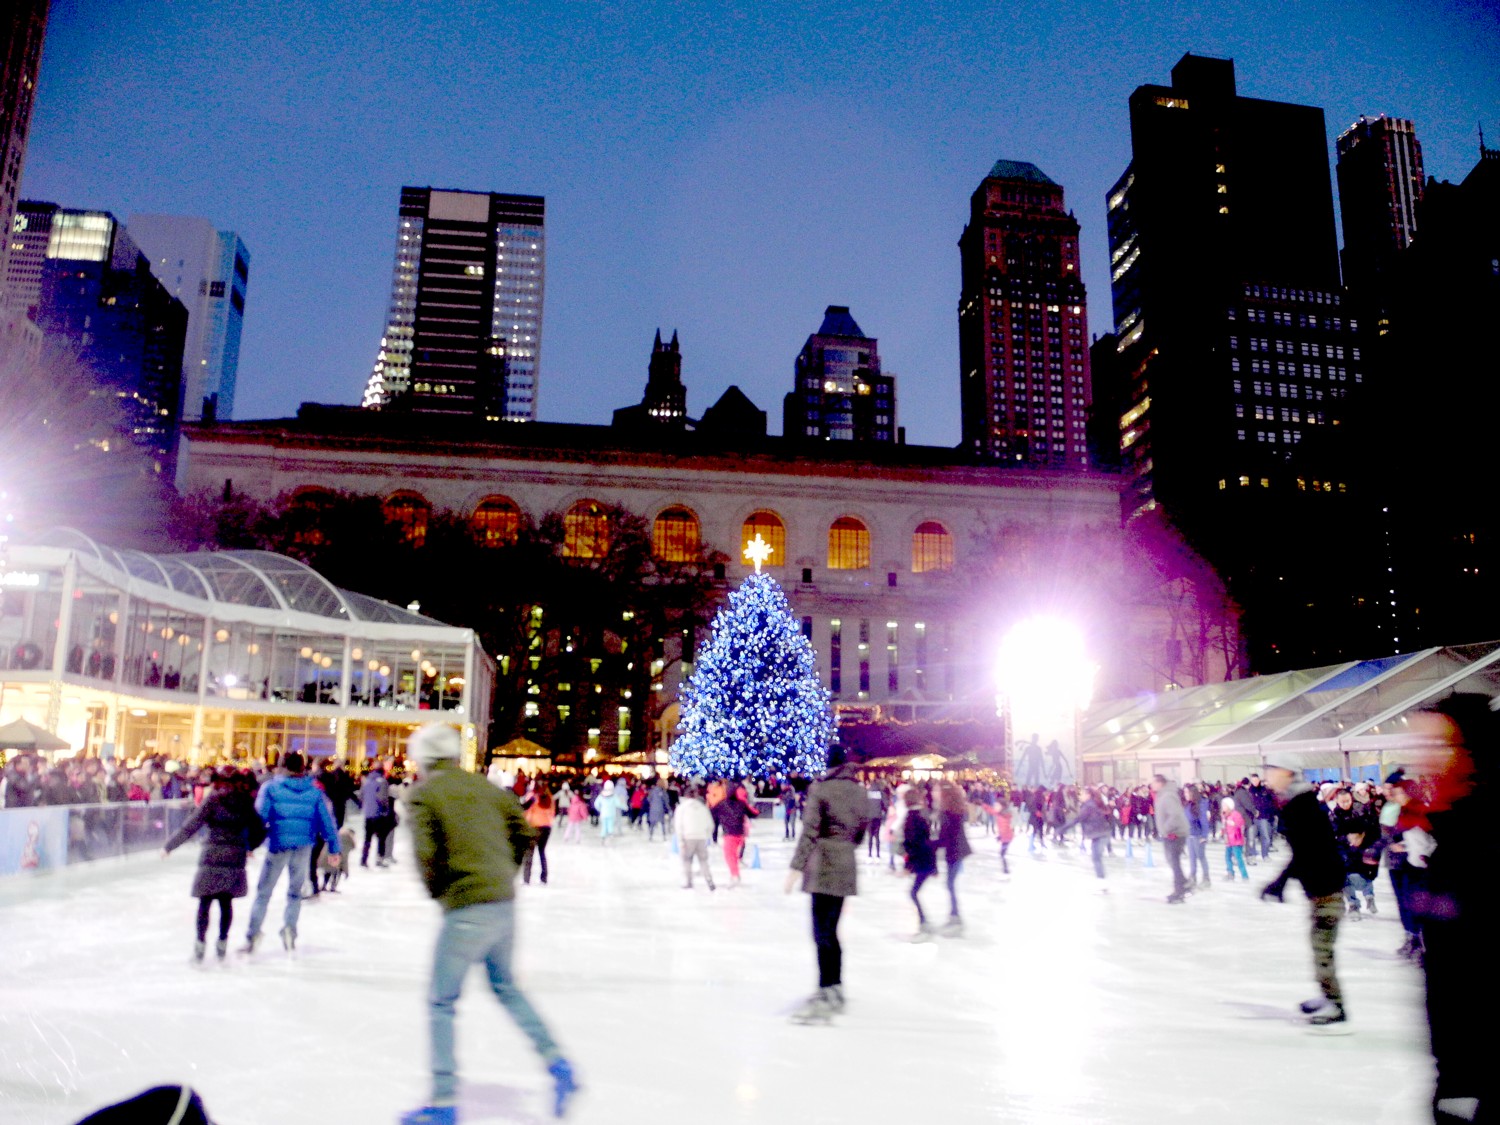 Bryant Park with its Christmas tree, skating rink, holiday market and cafes has become a warm and wonderful holiday venue © 2016 Karen Rubin/goingplacesfarandnear.com